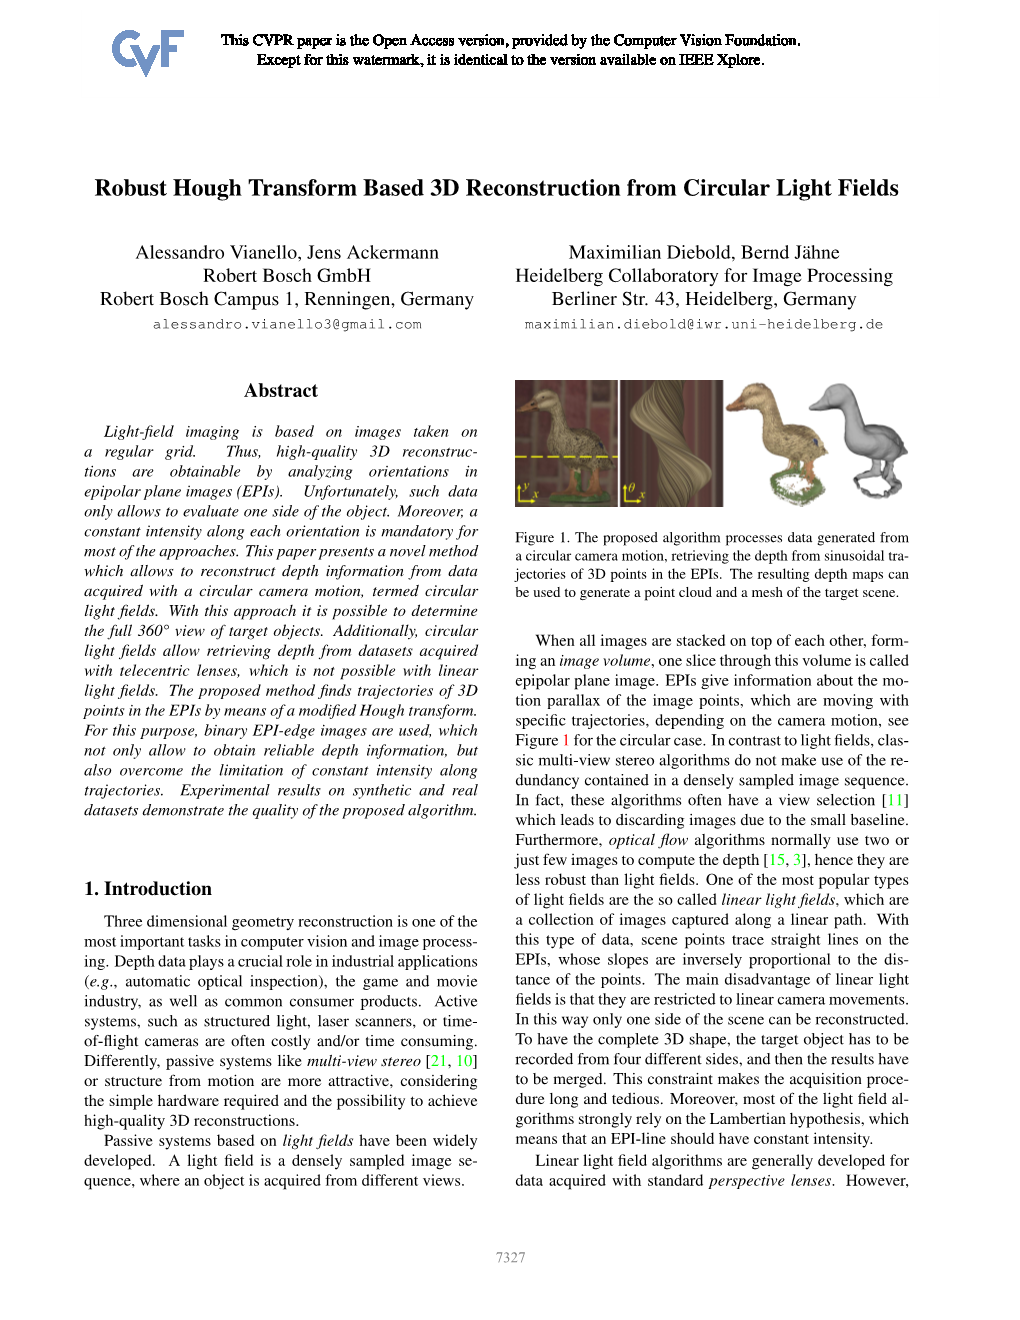 Robust Hough Transform Based 3D Reconstruction from Circular Light Fields